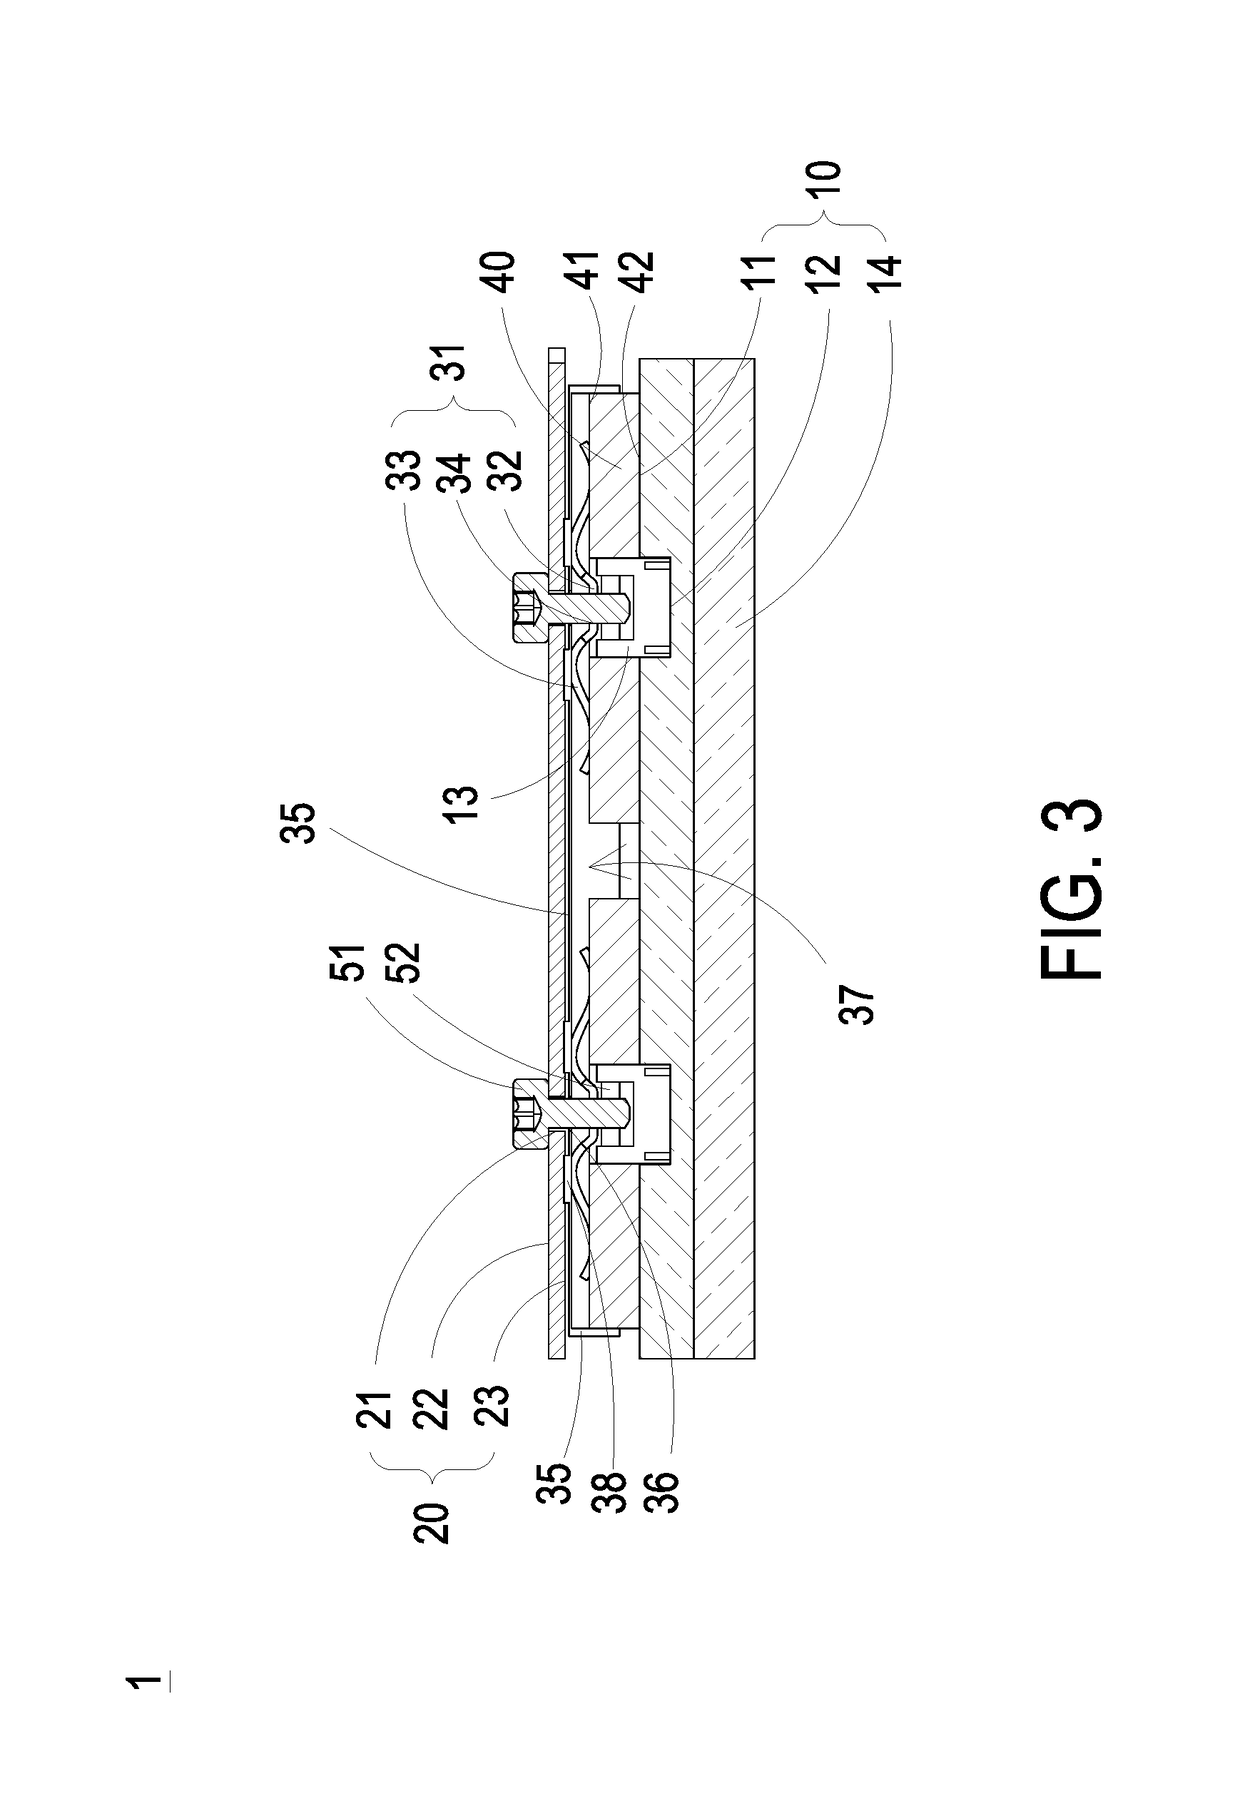 Power module assembly and assembling method thereof